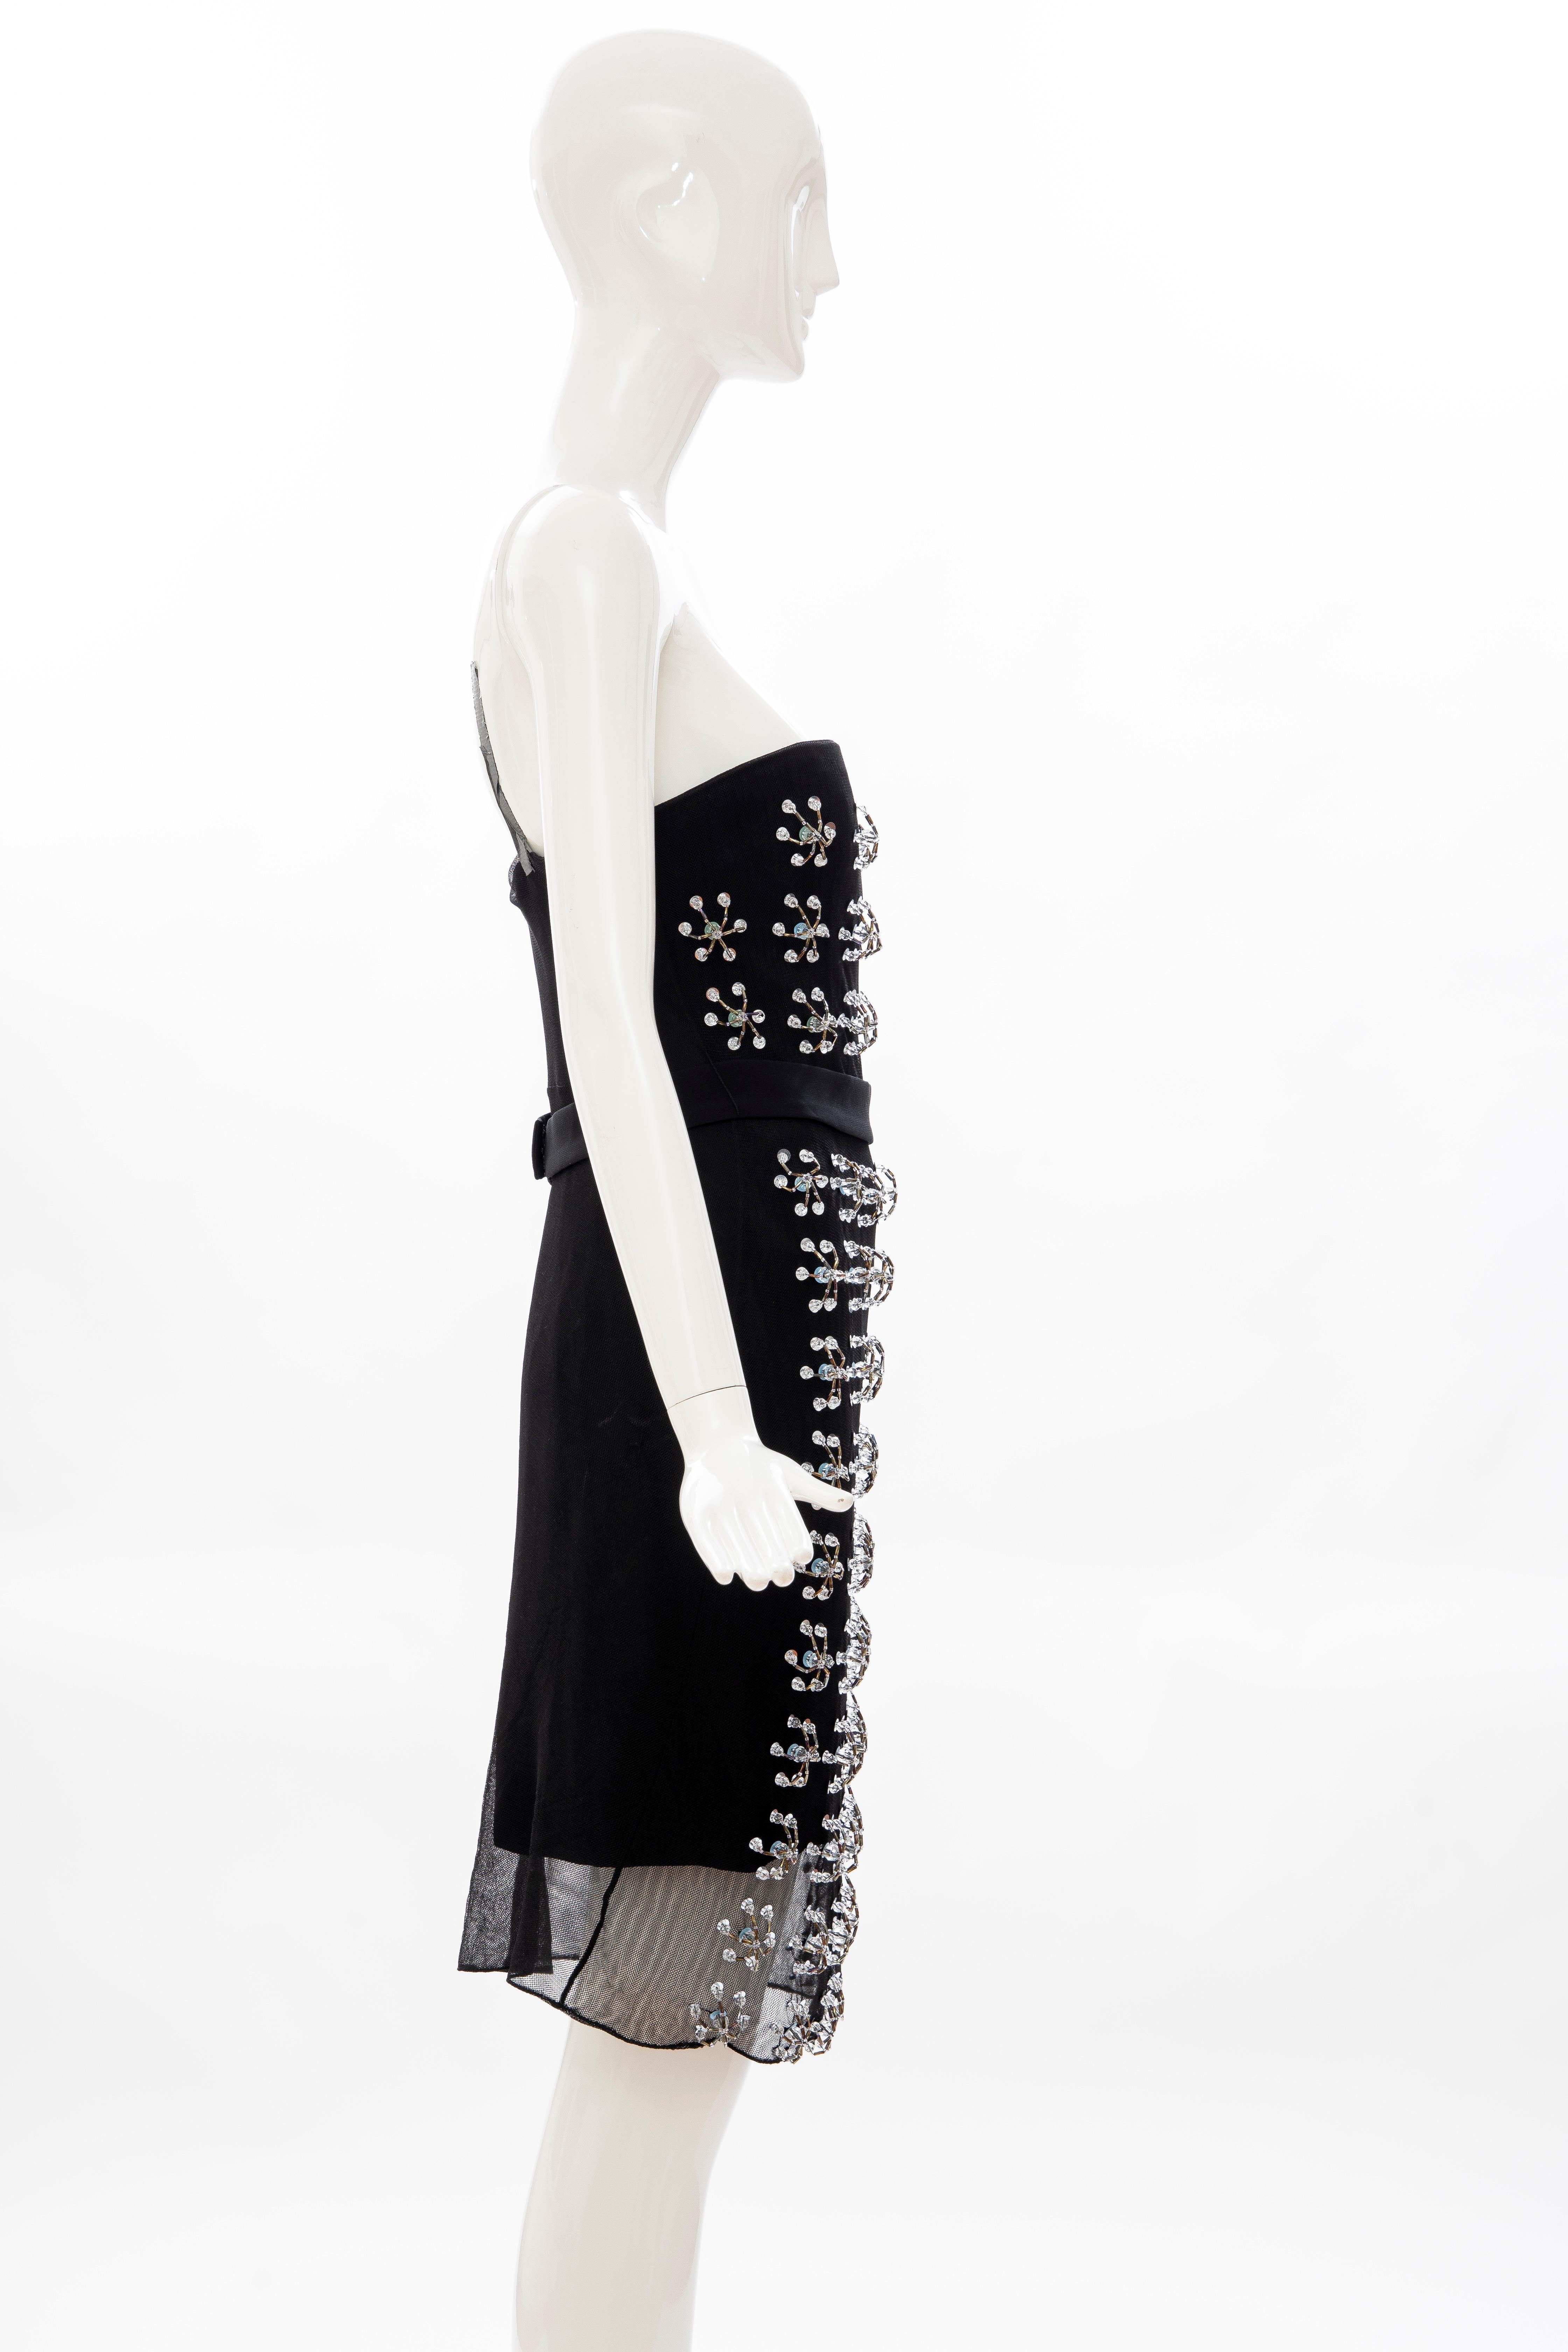 Raf Simons for Christian Dior Runway Strapless Embroidered Dress, Spring 2013 In Excellent Condition For Sale In Cincinnati, OH